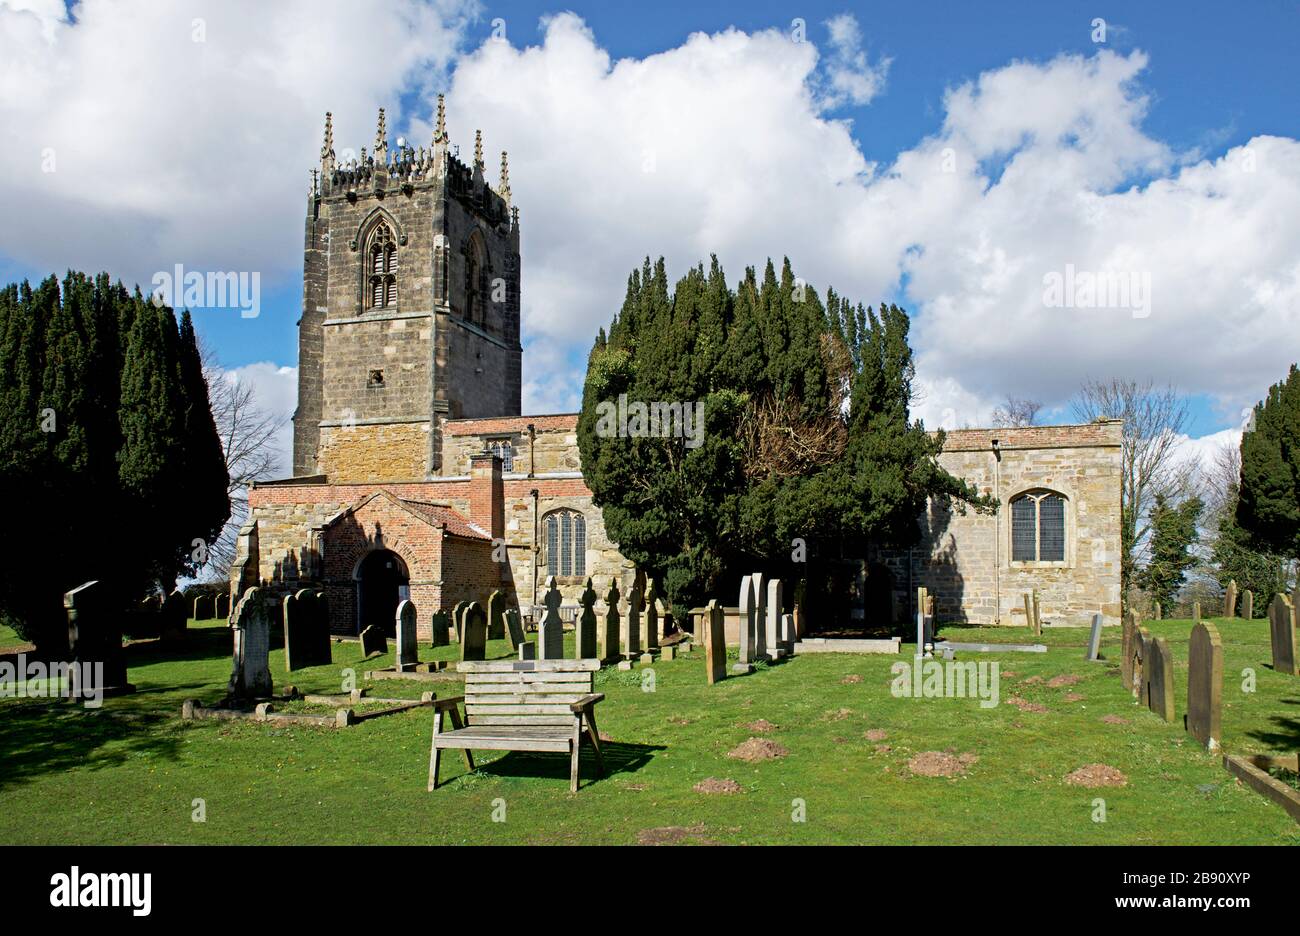 All Saints Church, Holme on Spalding Moor, East Yorkshire, Inghilterra Regno Unito Foto Stock